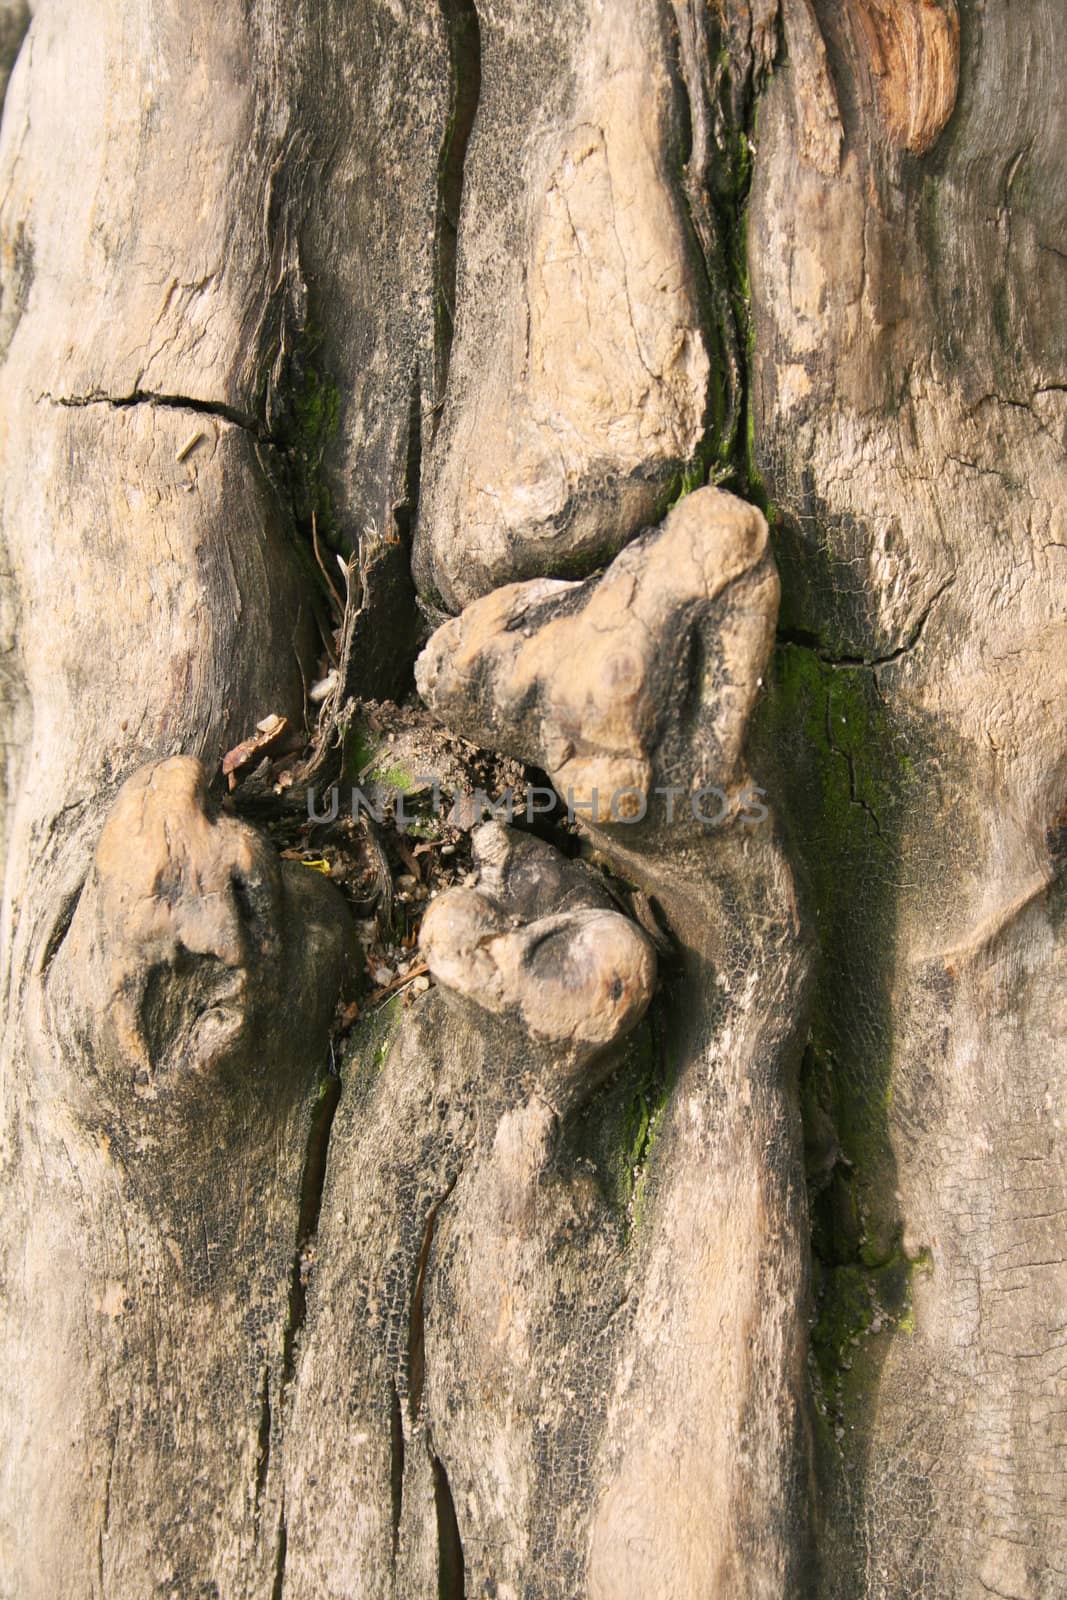 Gnarled tree close-up by timscottrom